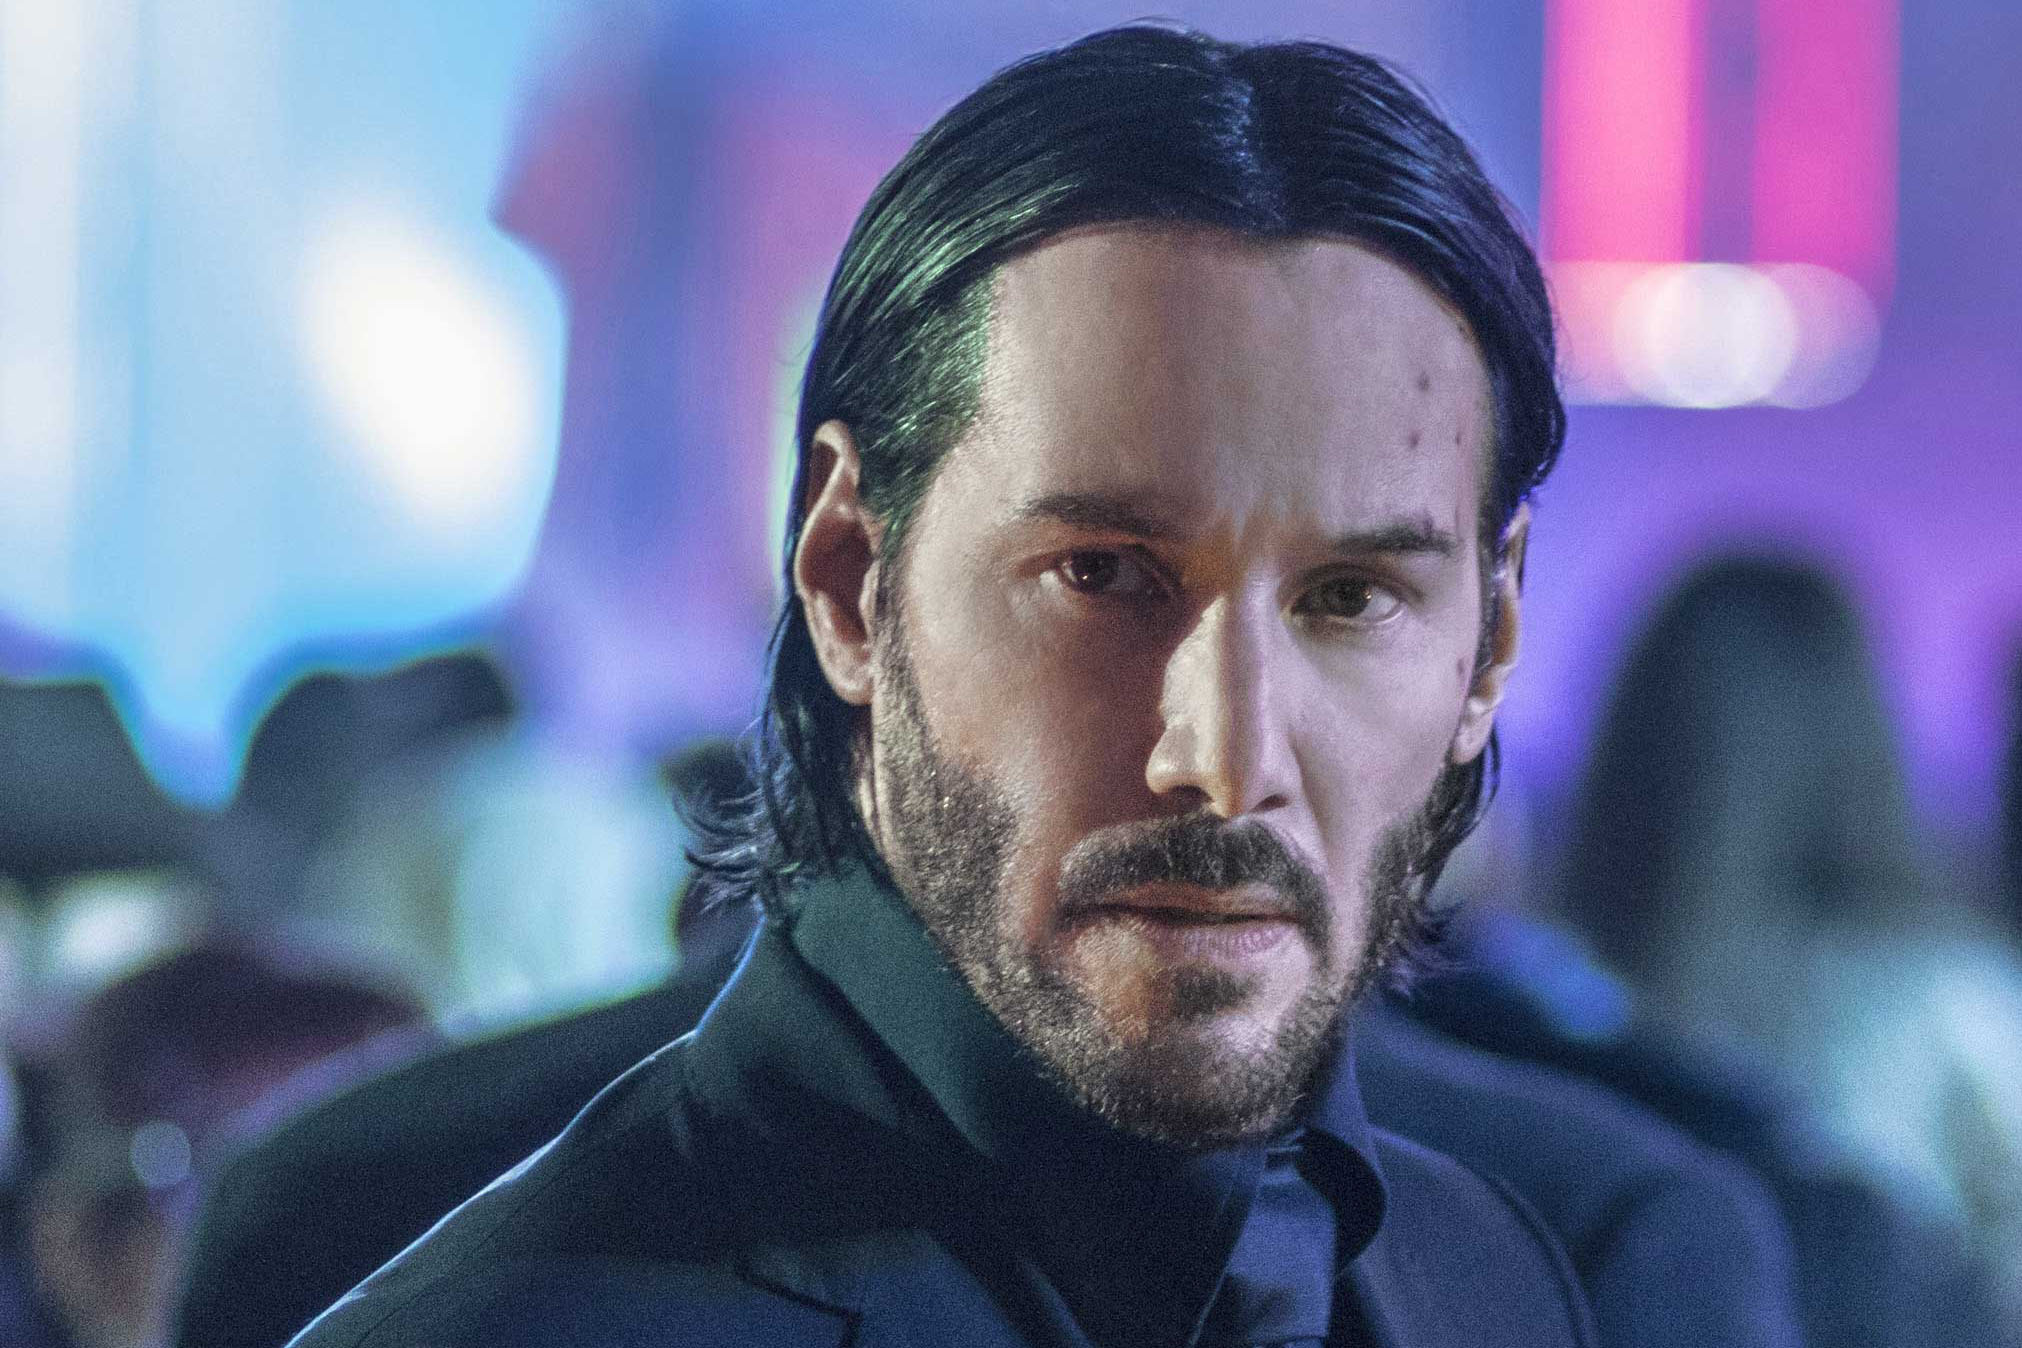 In Chapter 2, retired hit man John Wick (Reeves) heads abroad for another round of grisly vengeance